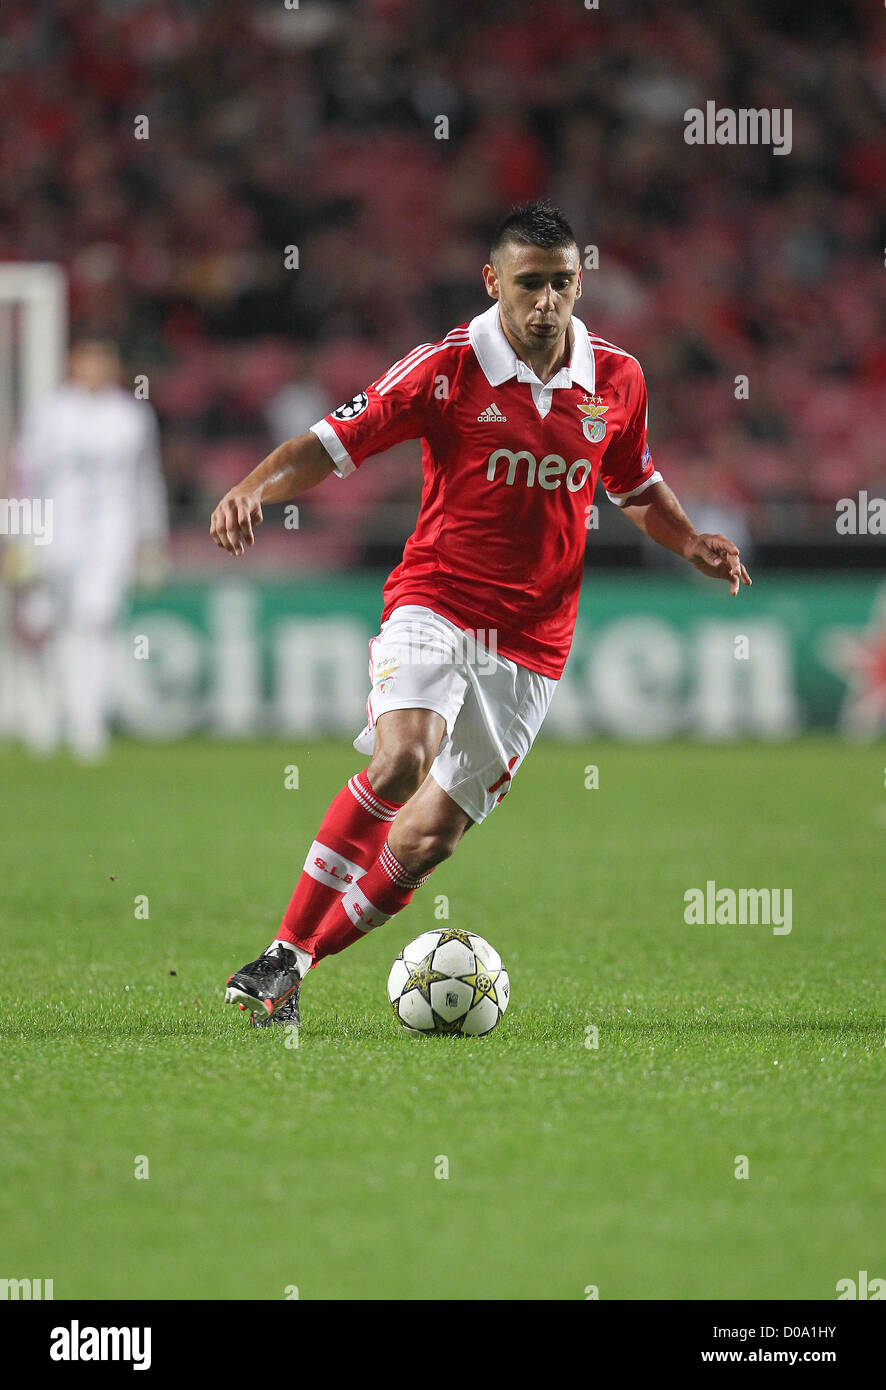 Lisbon, Portugal. 20th November 2012. Benfica's forward Eduardo Salvio  during the group G UEFA Champions League football match between Benfica and  Celtic at Luz Stadium in Lisbon on November 20, 2012. Photo /